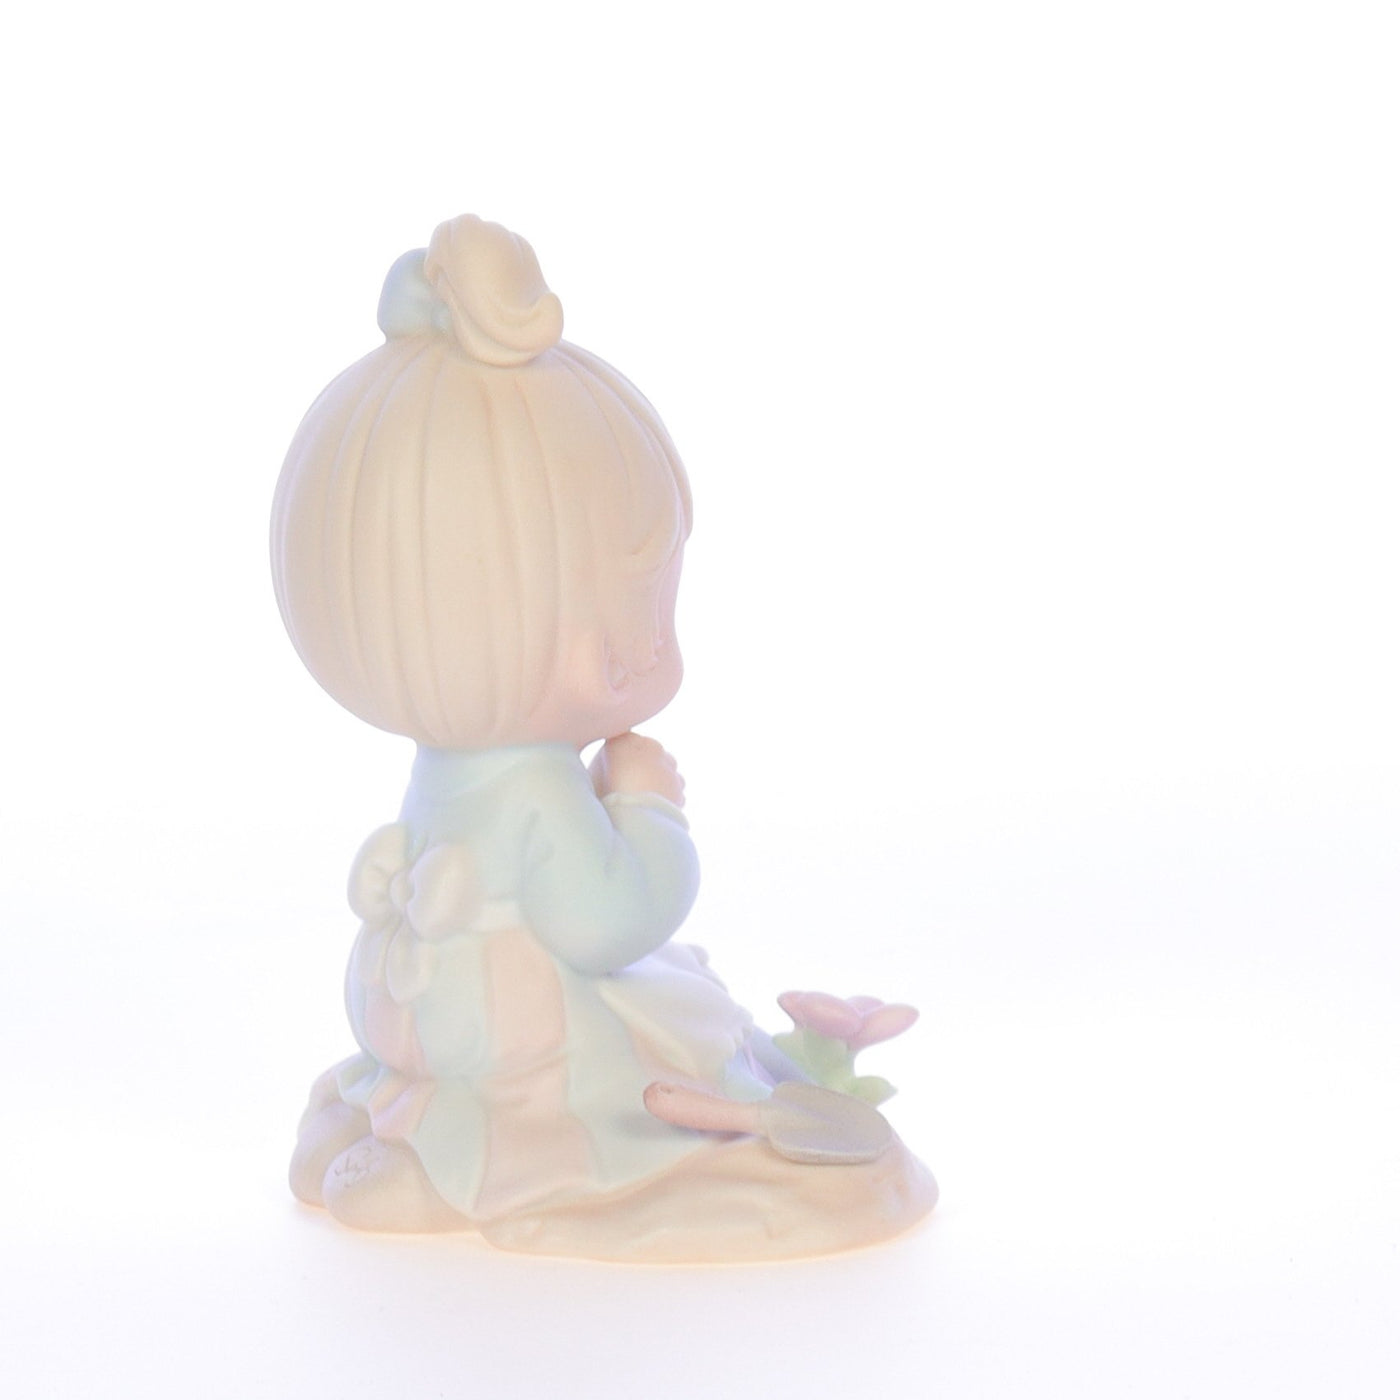 Precious_Moments_Porcelain_Figurine_Sowing_the_Seeds_of_Love_PM922_06.jpg